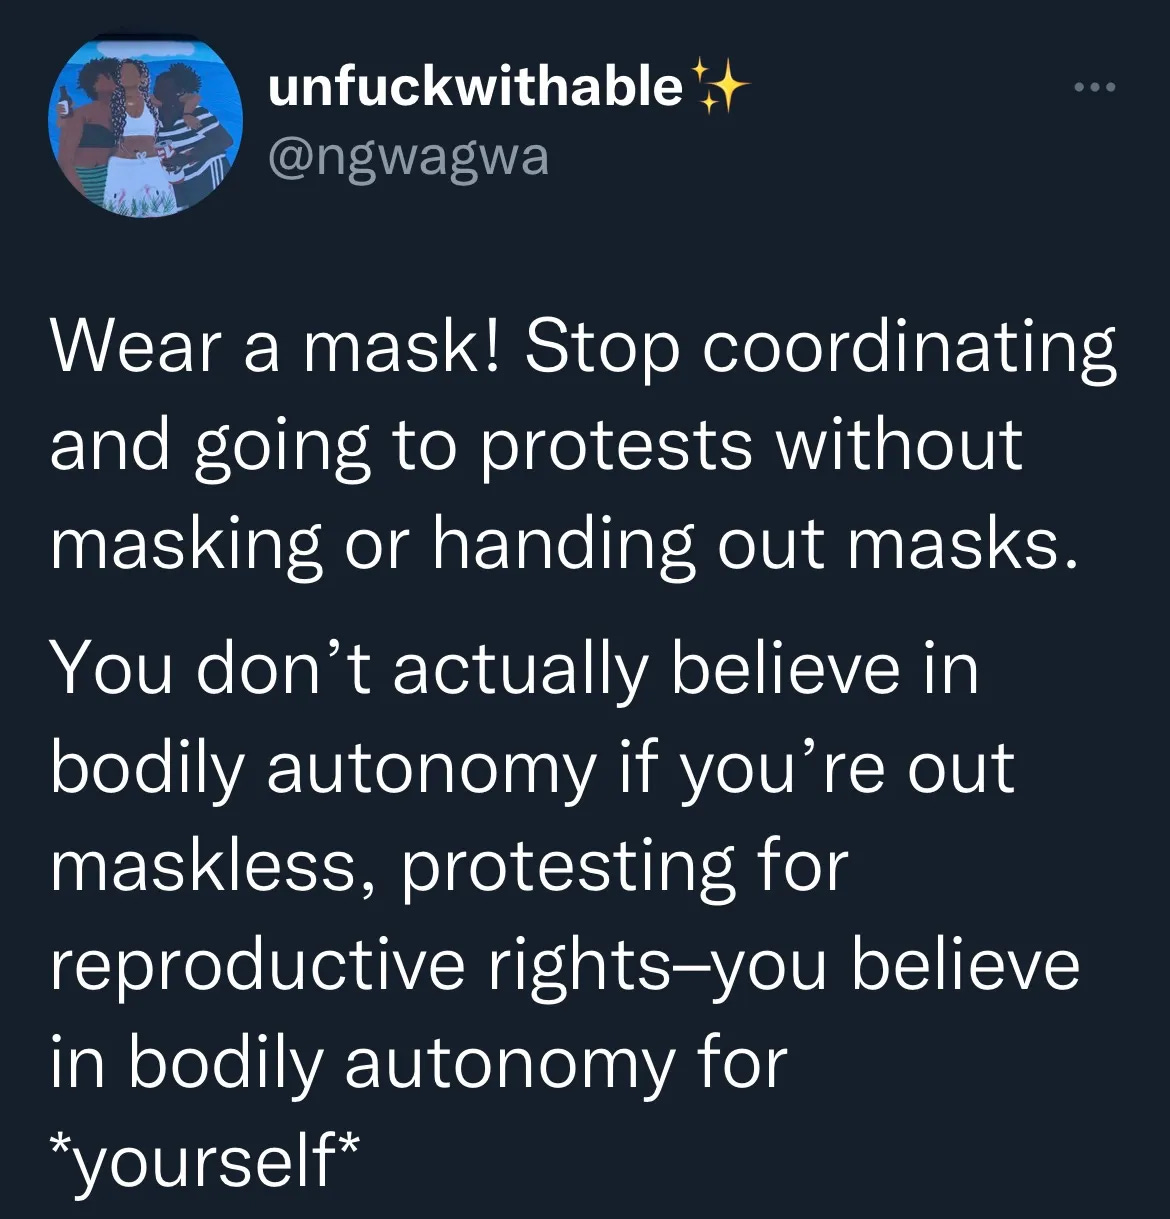 Wear a mask! Stop coordinating protests without masking or handing out masks. You don't actually believe in bodily autonomy if you're out maskless, protesting for reproductive rights--you believe in bodily autonomy for *yourself*